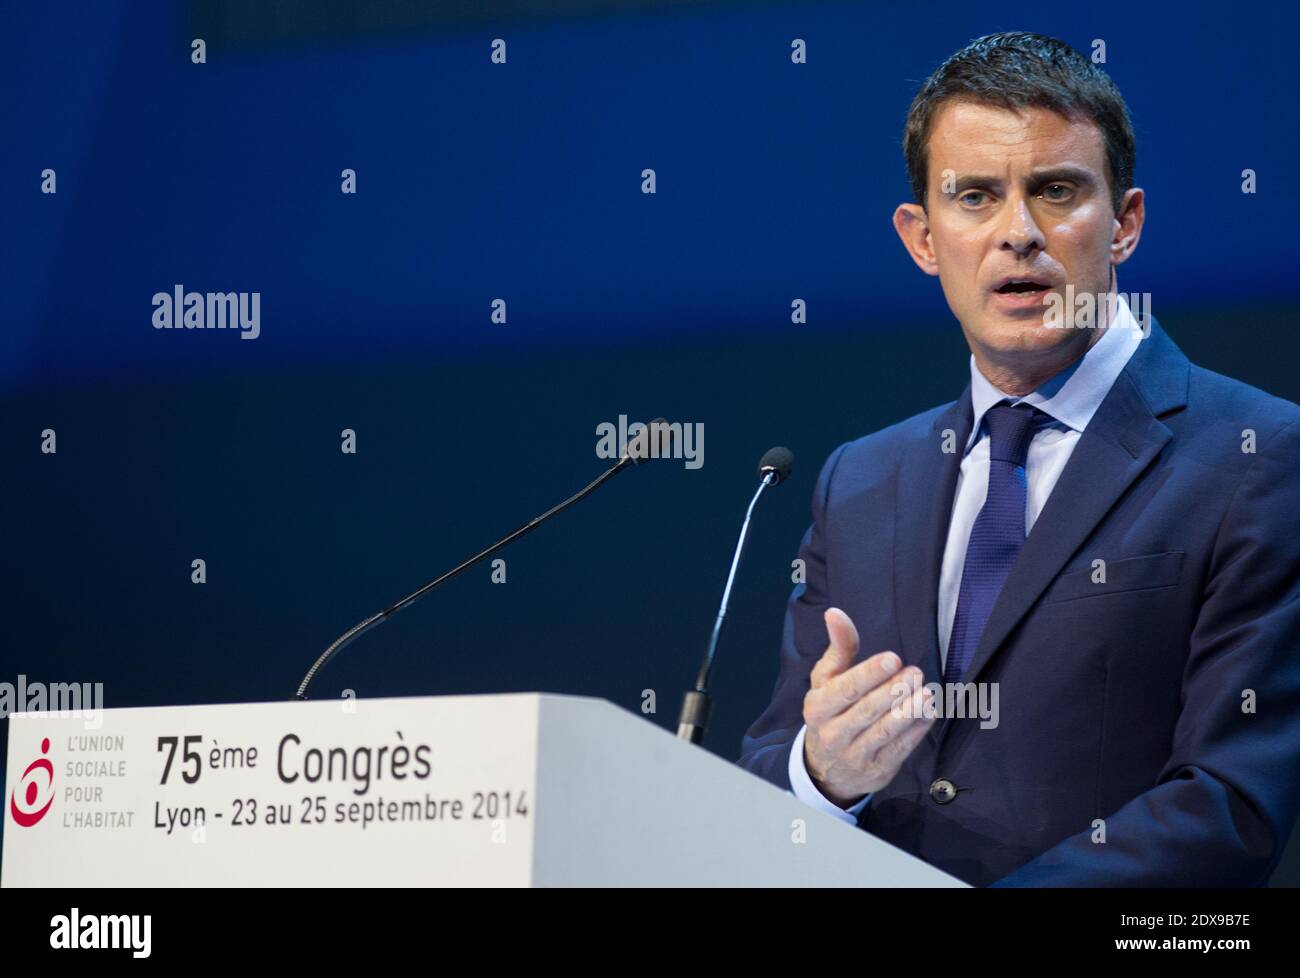 French Prime Minister Manuel Valls along with Minister of Housing and Territorial Equality Sylvia Pinel attending the 75th Annual Congress of the Social Union for Housing in Lyon, France on September 25, 2014. Photos by Vincent Dargent/ABACAPRESS.COM Stock Photo